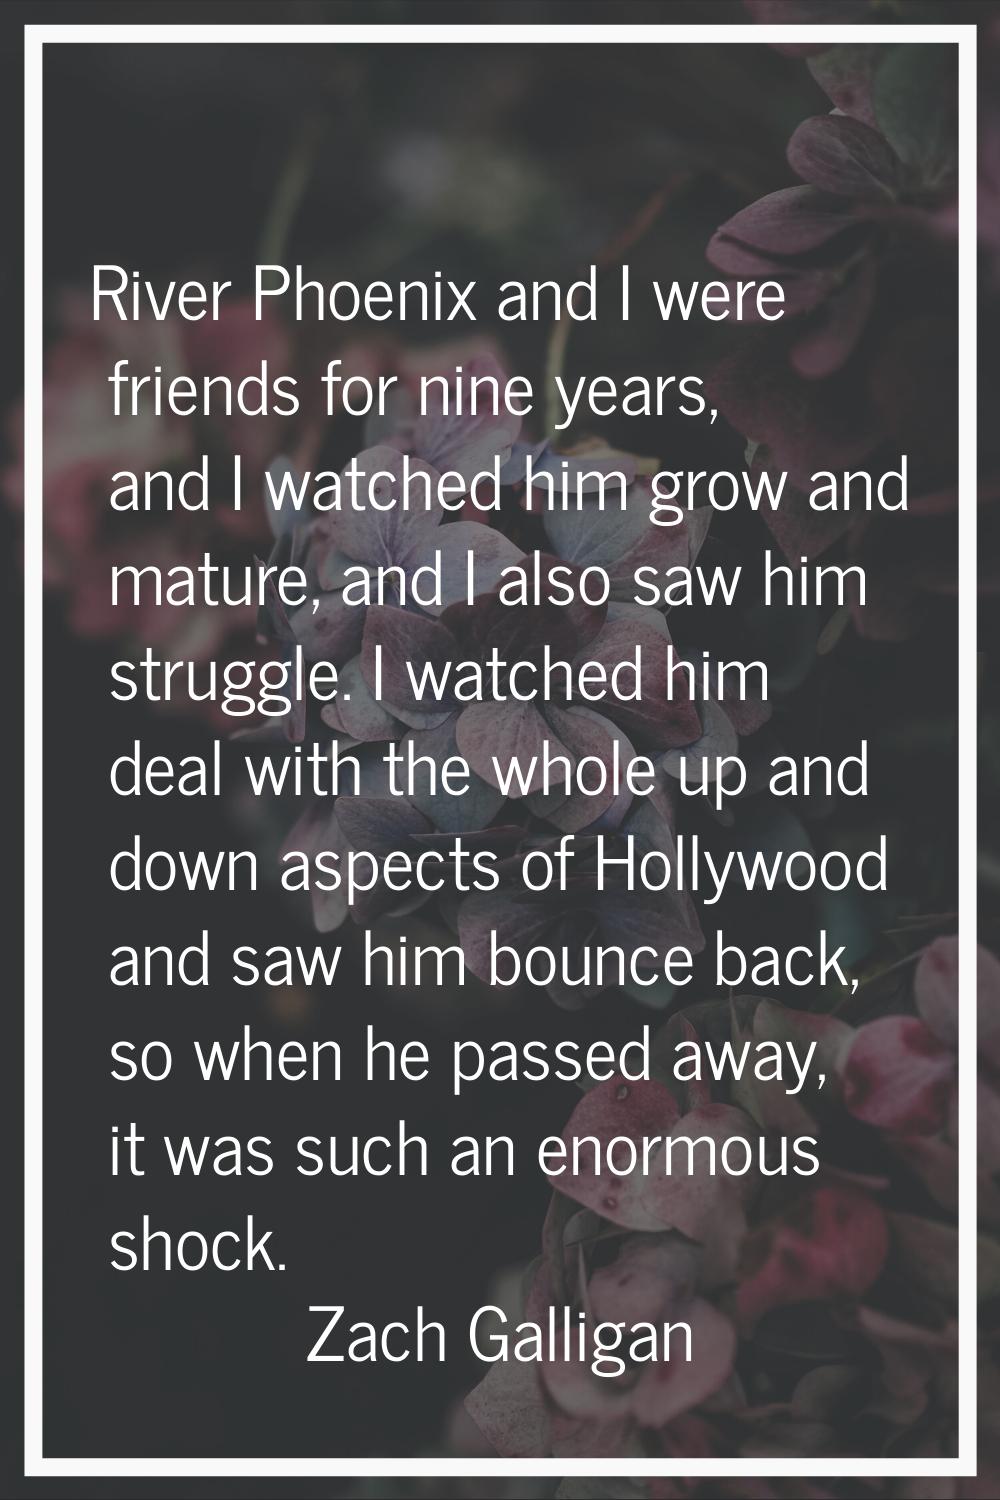 River Phoenix and I were friends for nine years, and I watched him grow and mature, and I also saw 